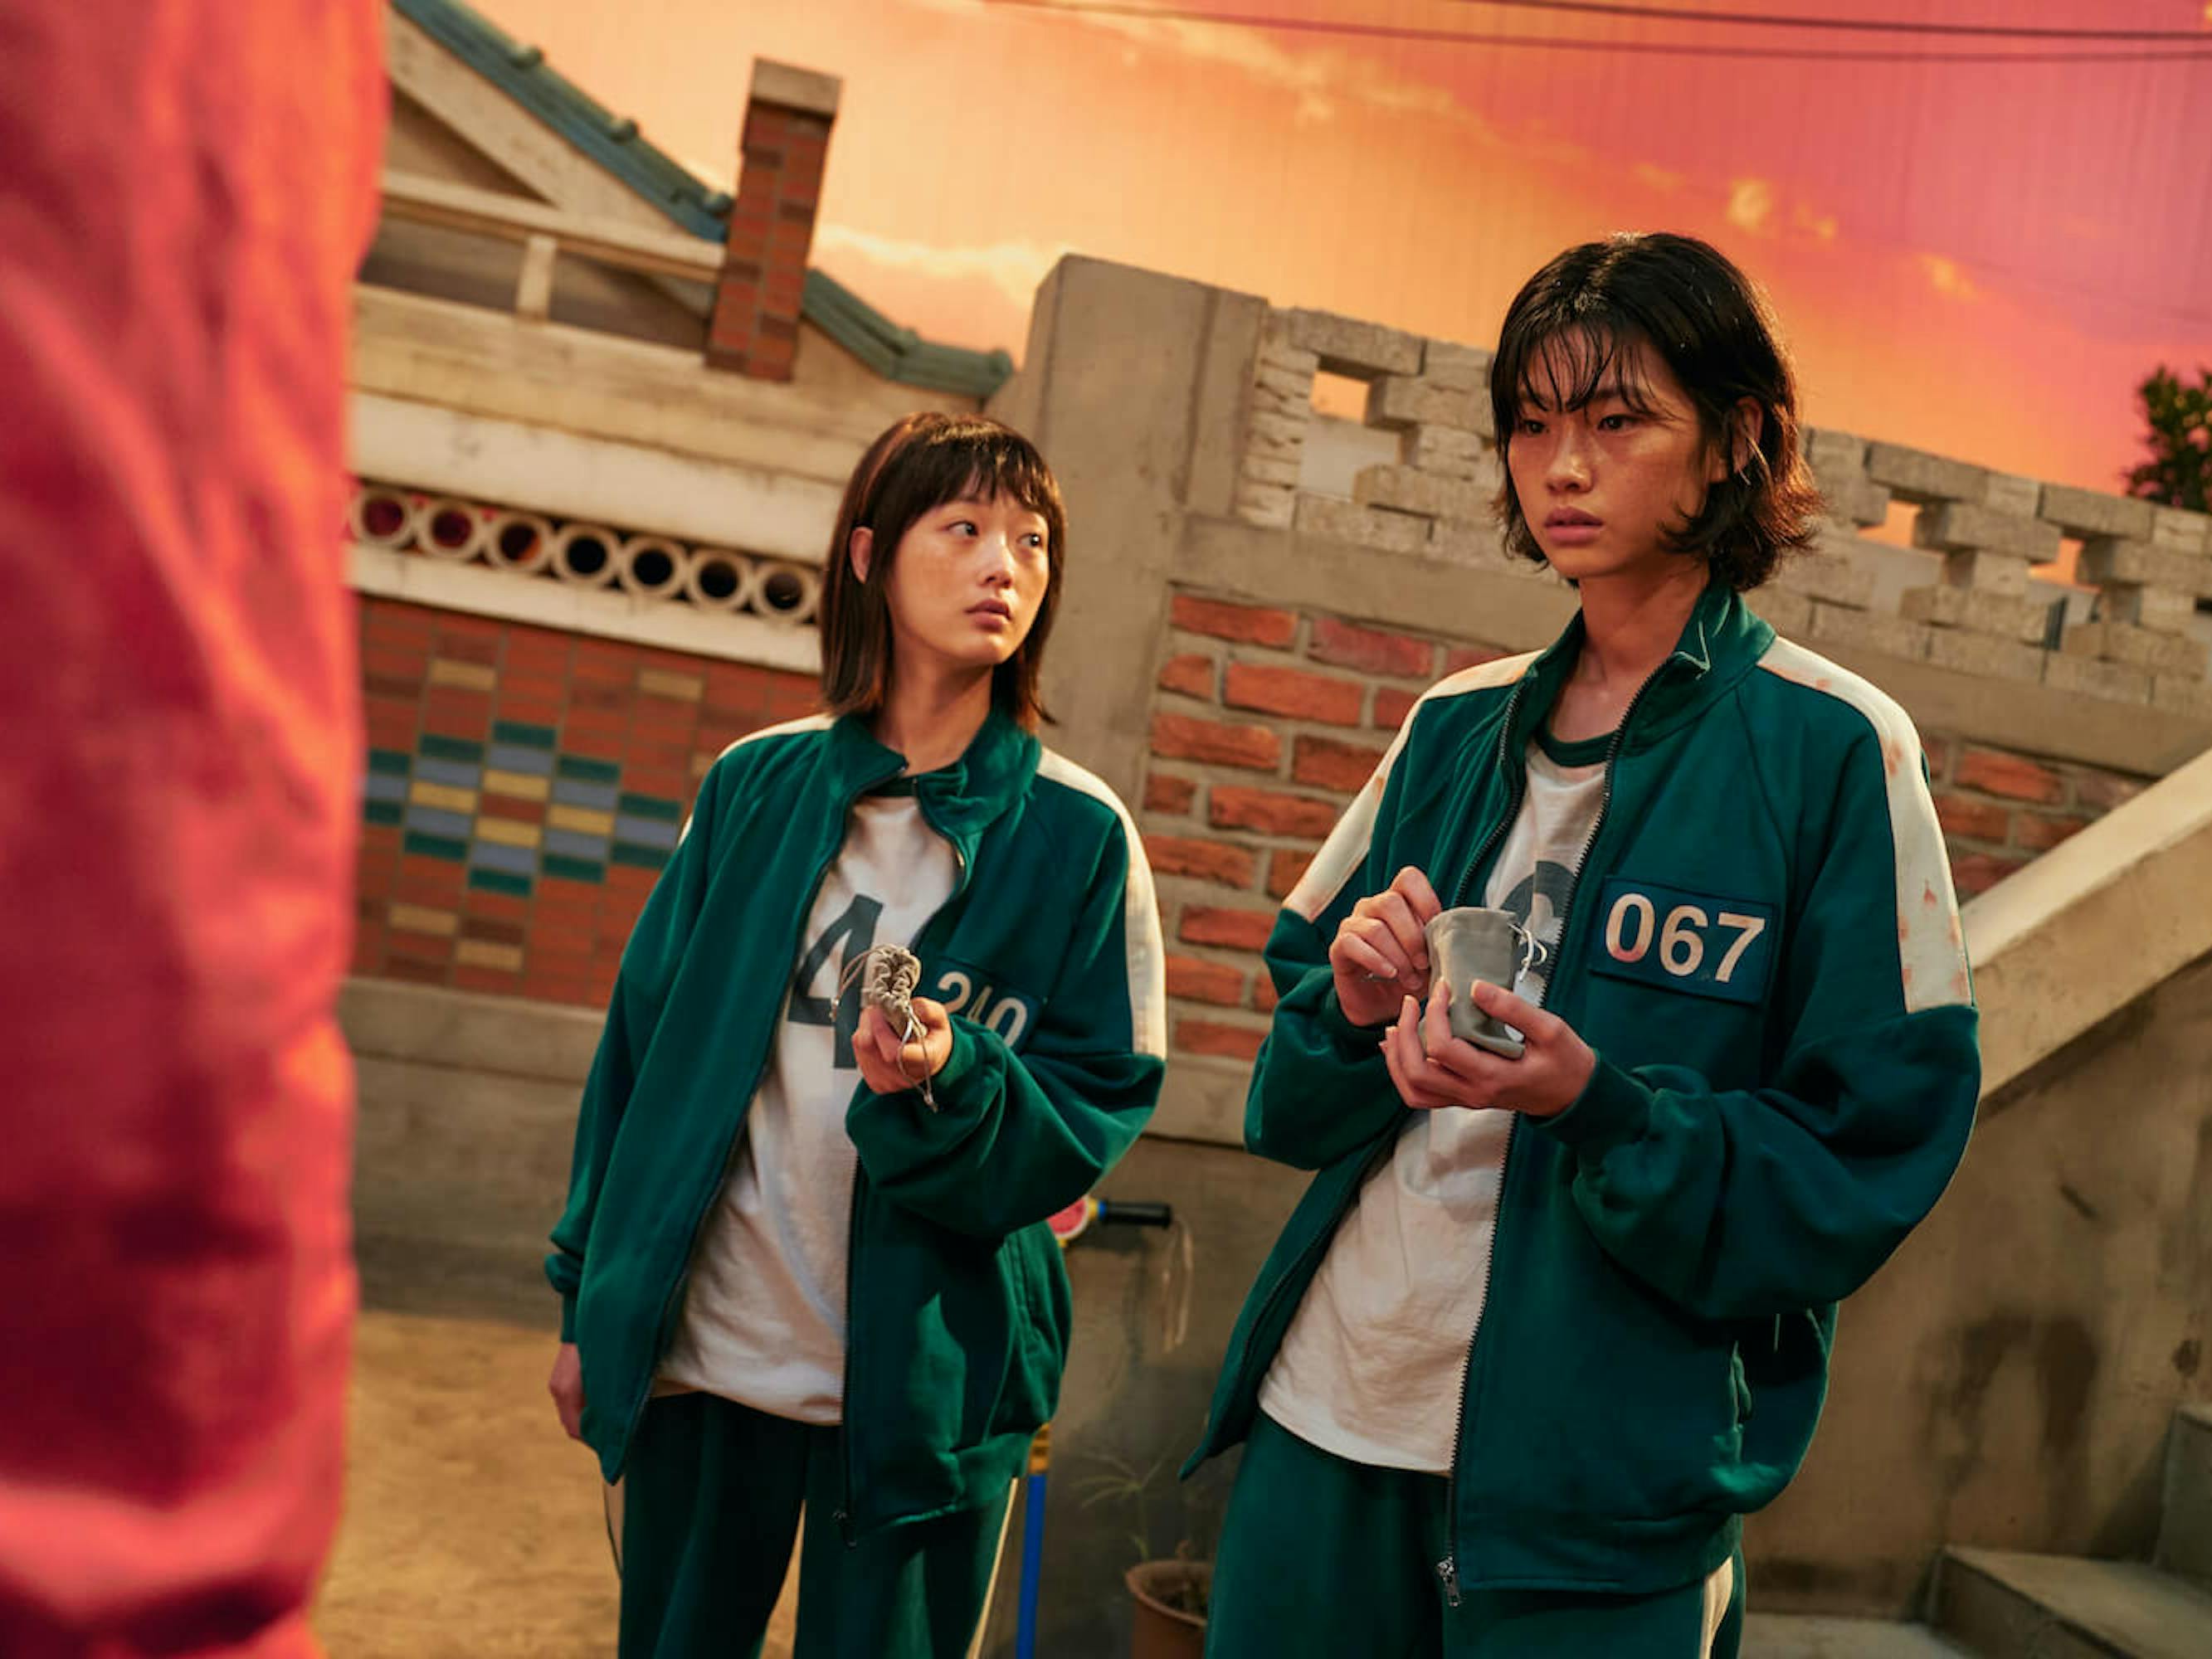 Ji-yeong (Lee Yoo-mi) and Kang Sae-byeok (Jung Ho-yeon) stand together picking something out of a small leather bag. Their green tracksuits are unzipped and they are sweaty and afraid. In the background is a brick wall and a red and orange sky.